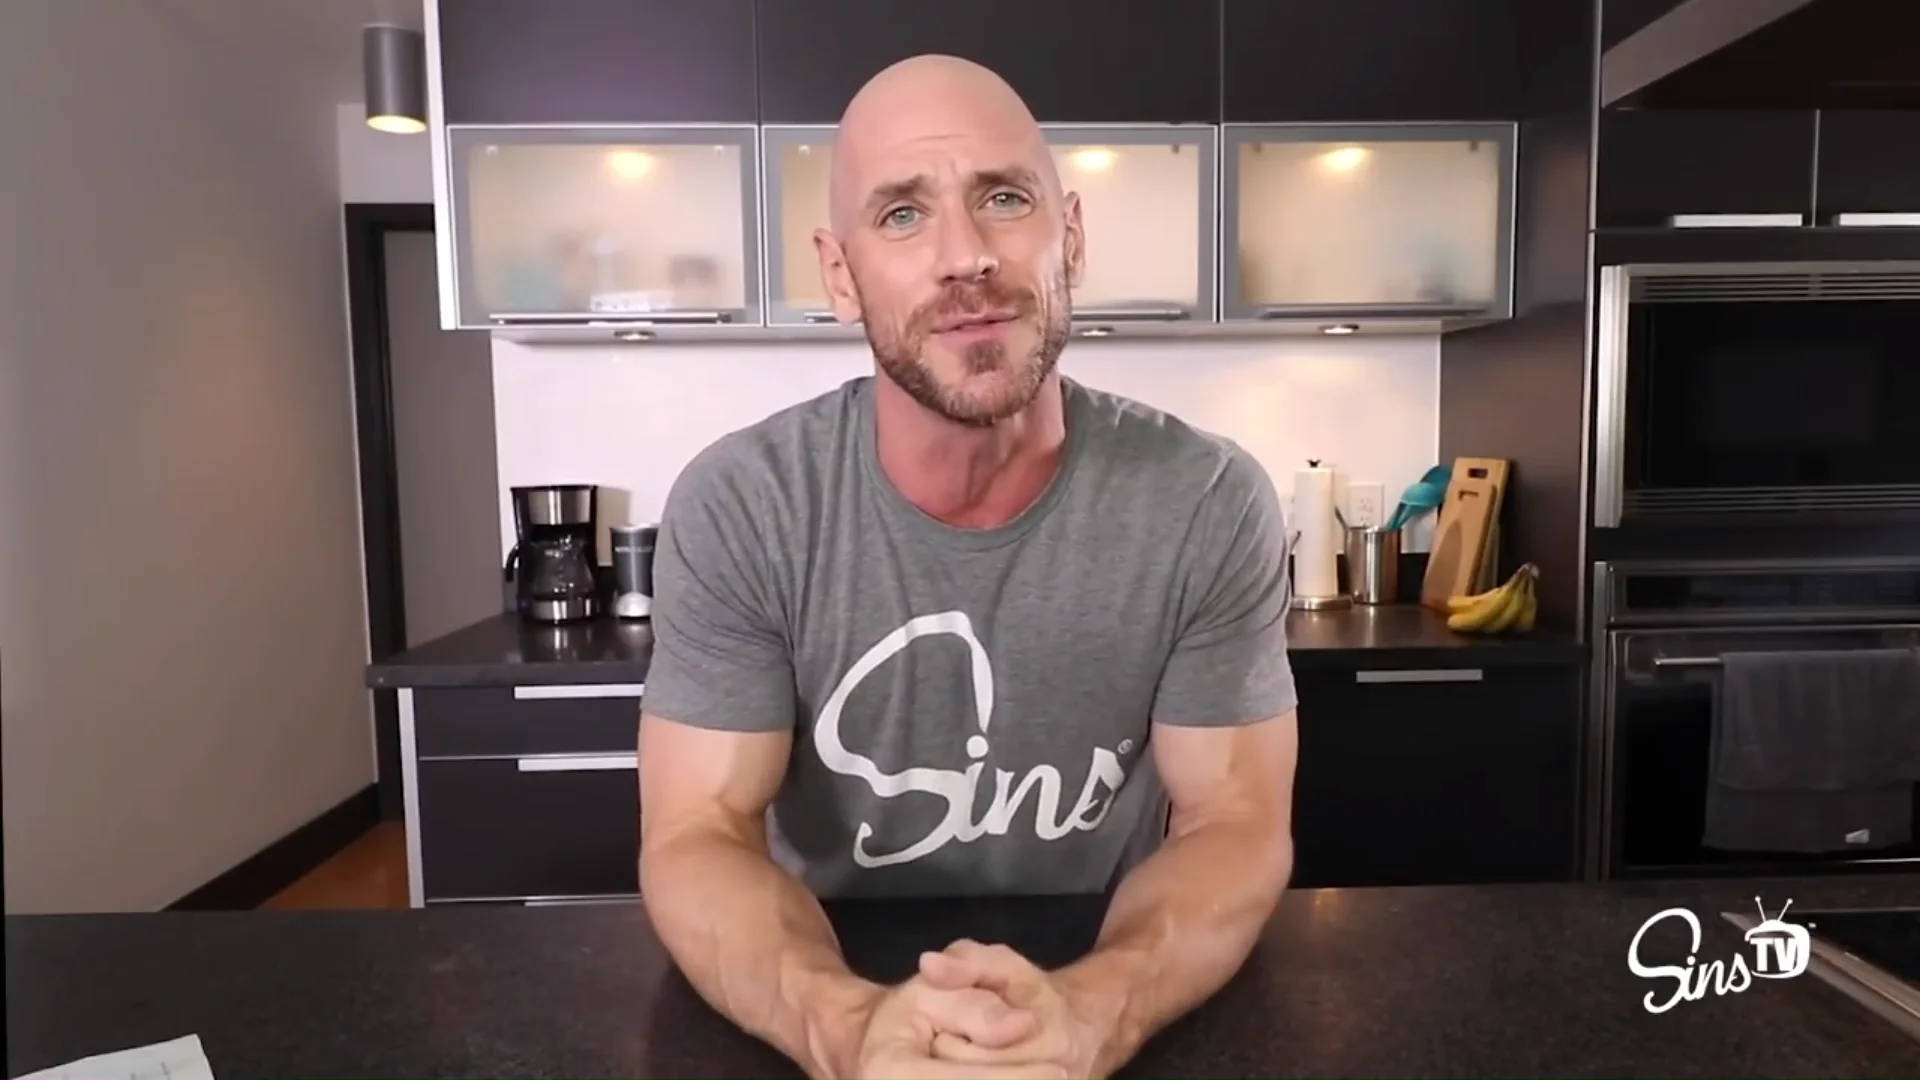 caren mccormack recommends johnny sins hd videos pic